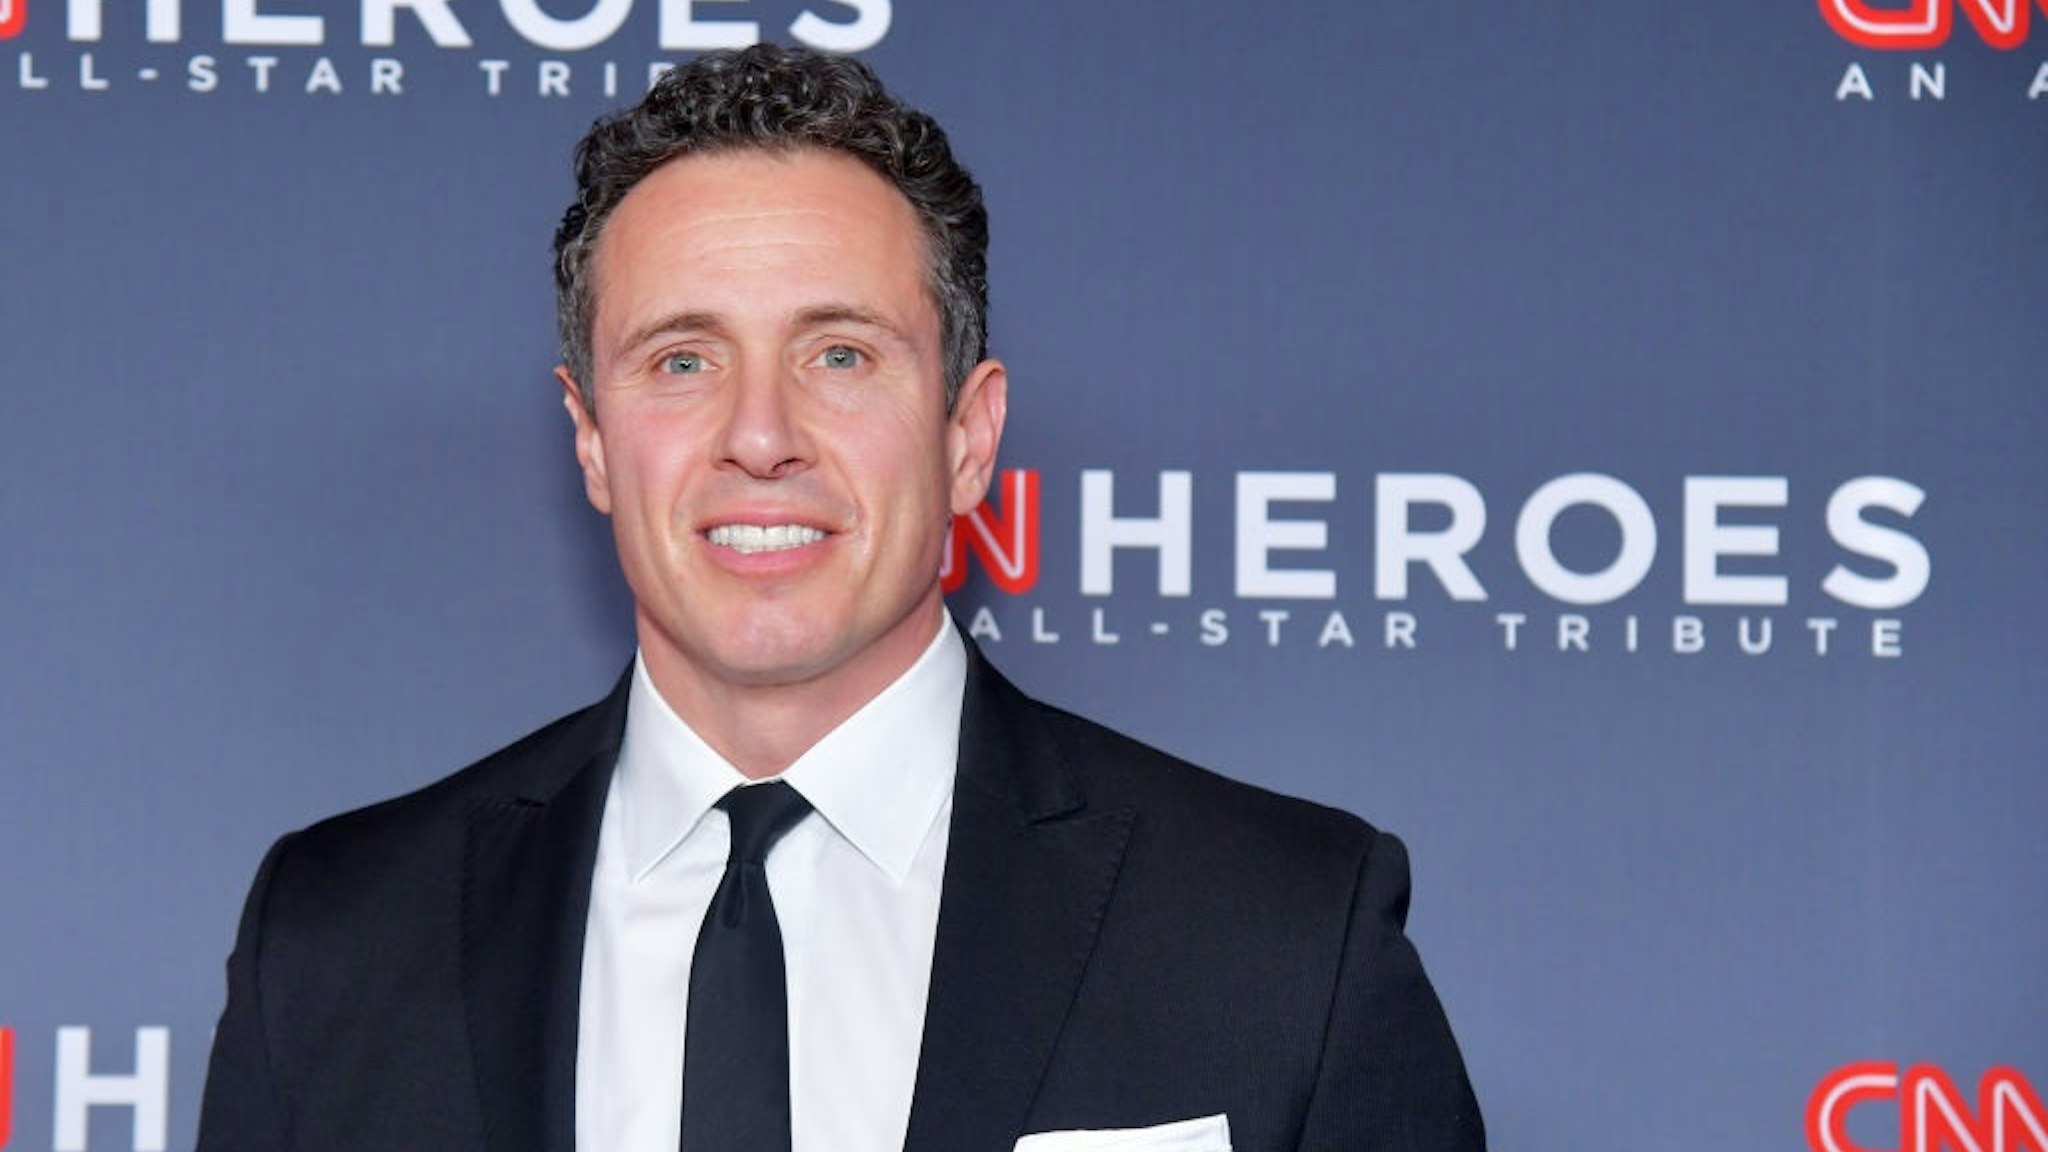 NEW YORK, NY - DECEMBER 09: Chris Cuomo attends the 12th Annual CNN Heroes: An All-Star Tribute at American Museum of Natural History on December 9, 2018 in New York City.